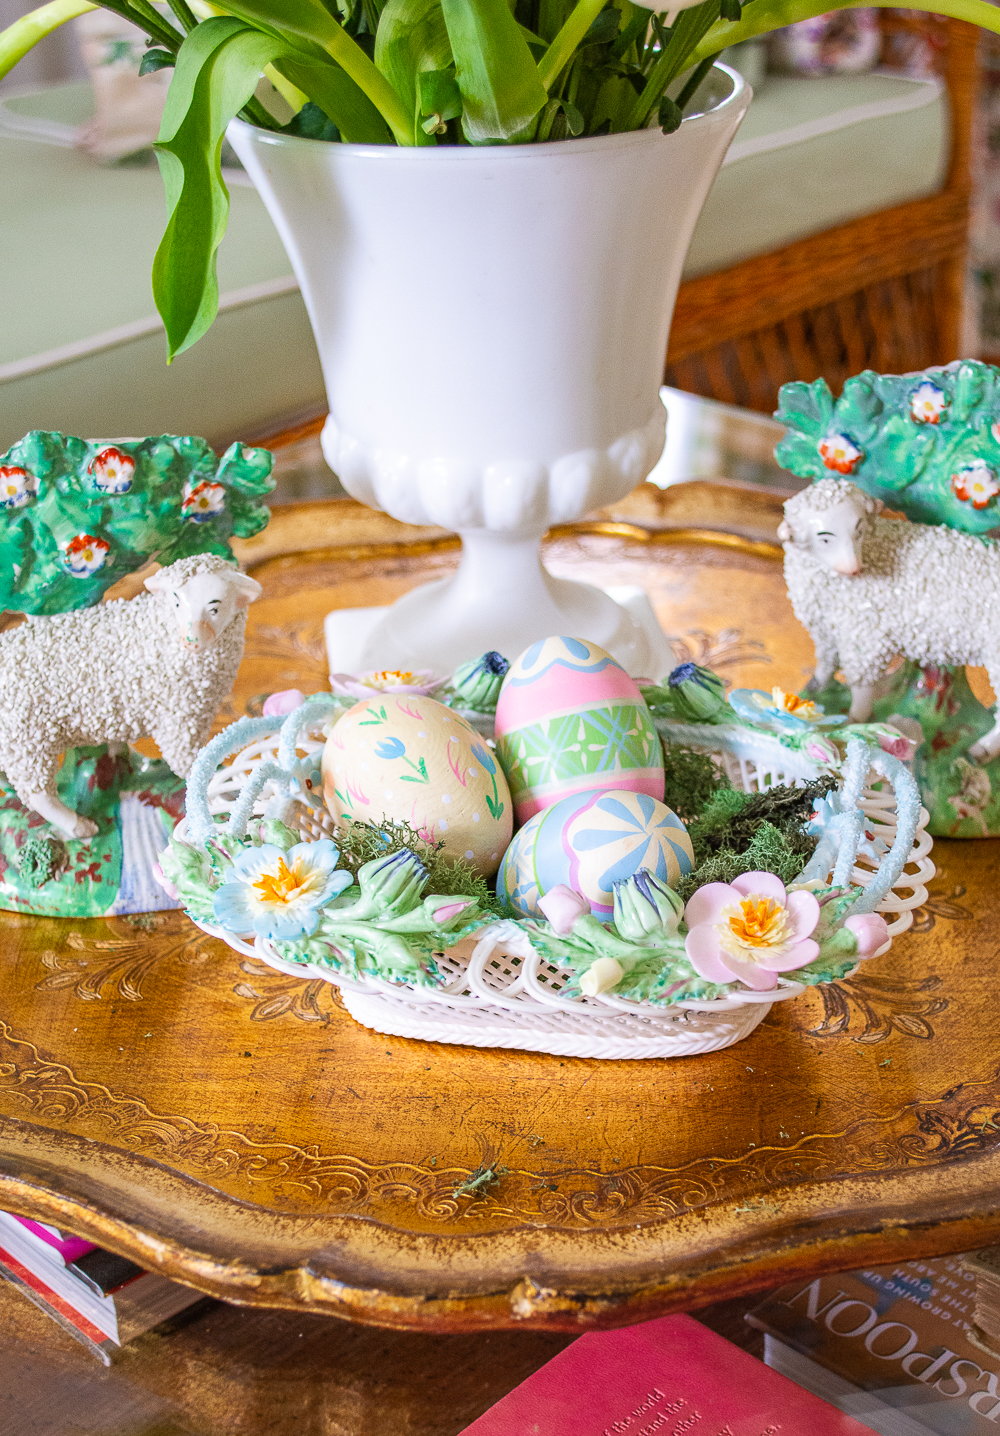 Irish porcelain pierced basket with flowers and filled with hand painted Easter eggs